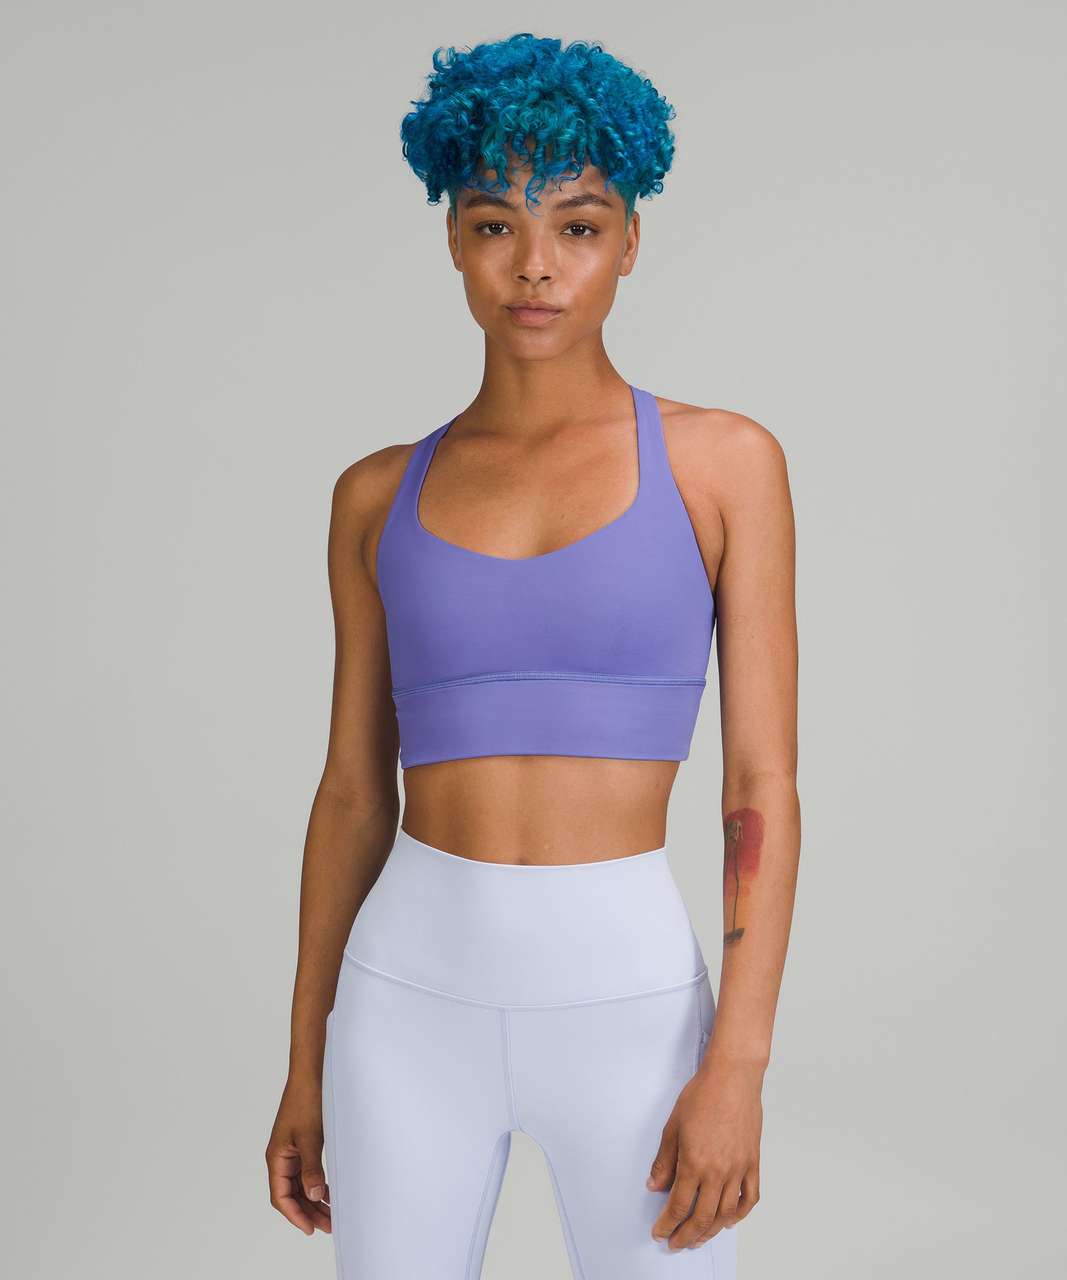 Lululemon Free to Be Longline Bra - Wild *Light Support, A/B Cup - Charged Indigo / Pastel Blue